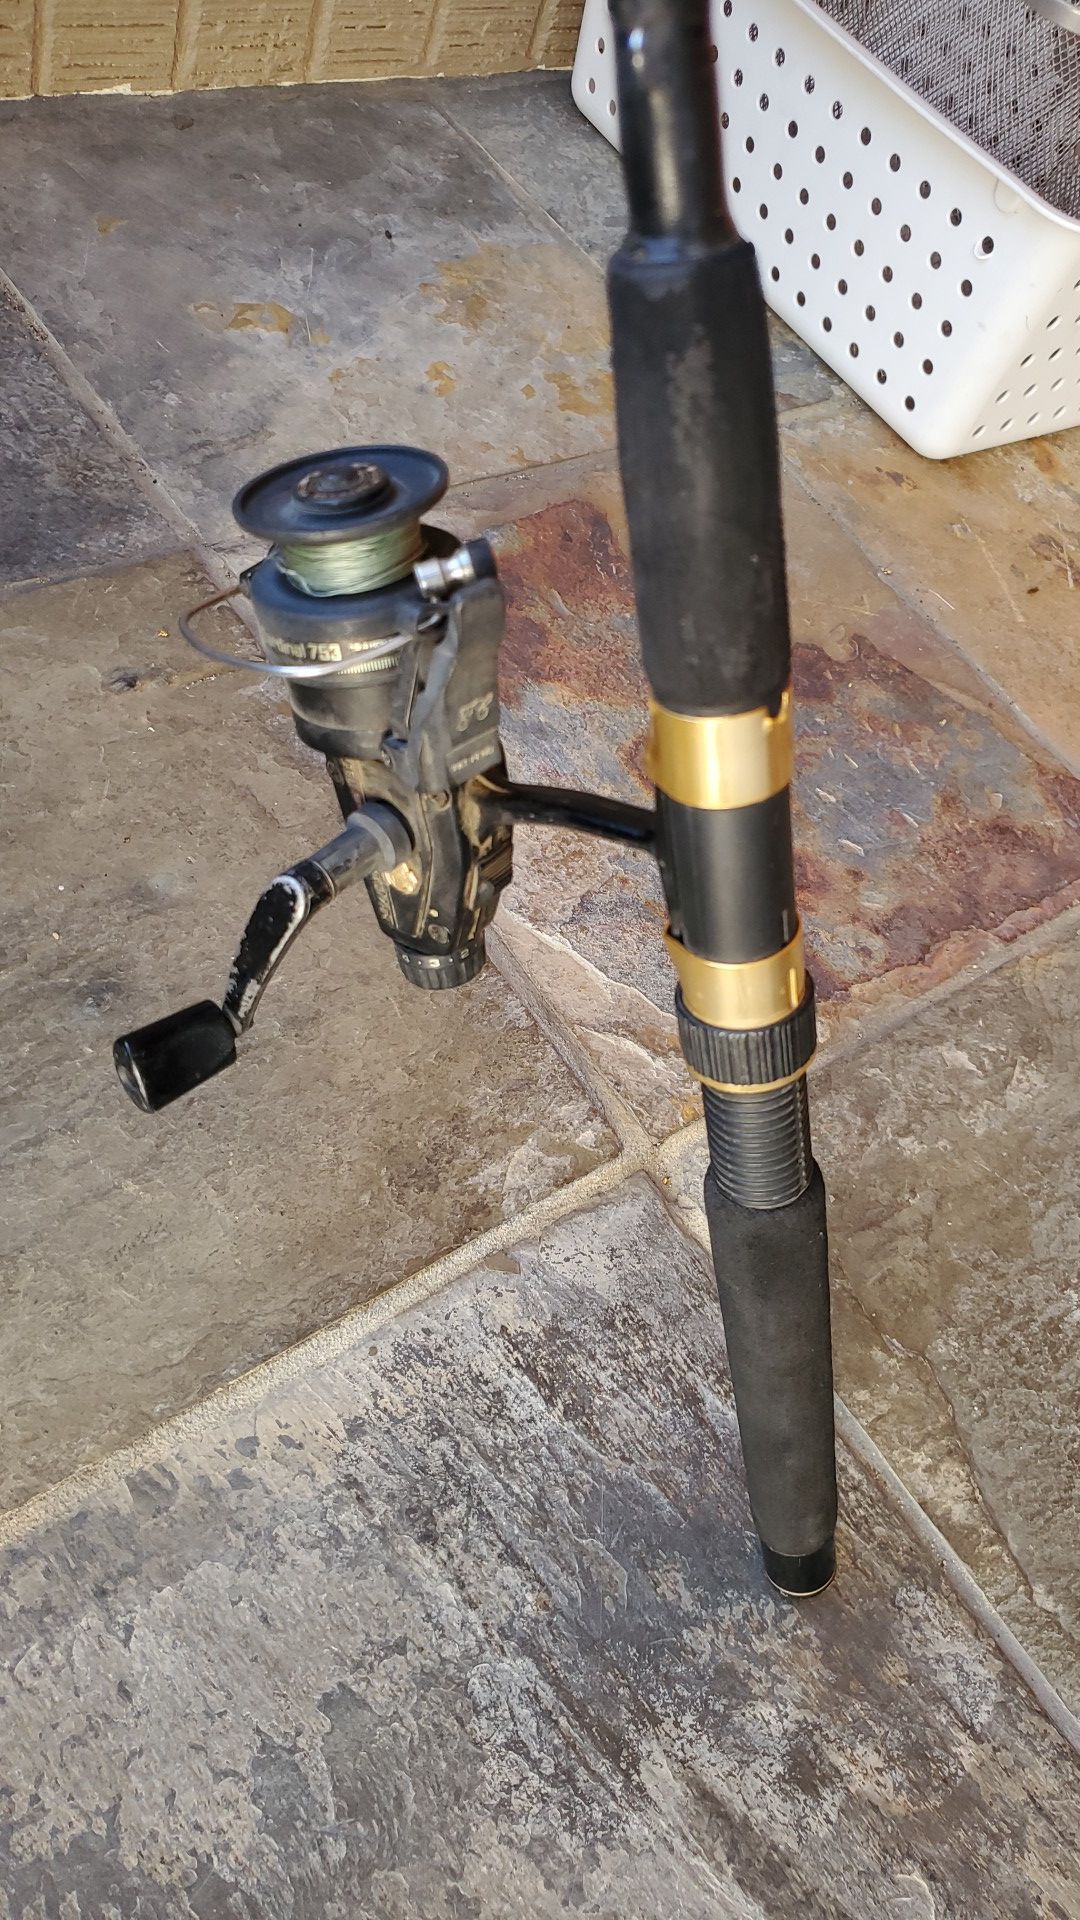 Cardinal 753 fishing reel and rod. Works great